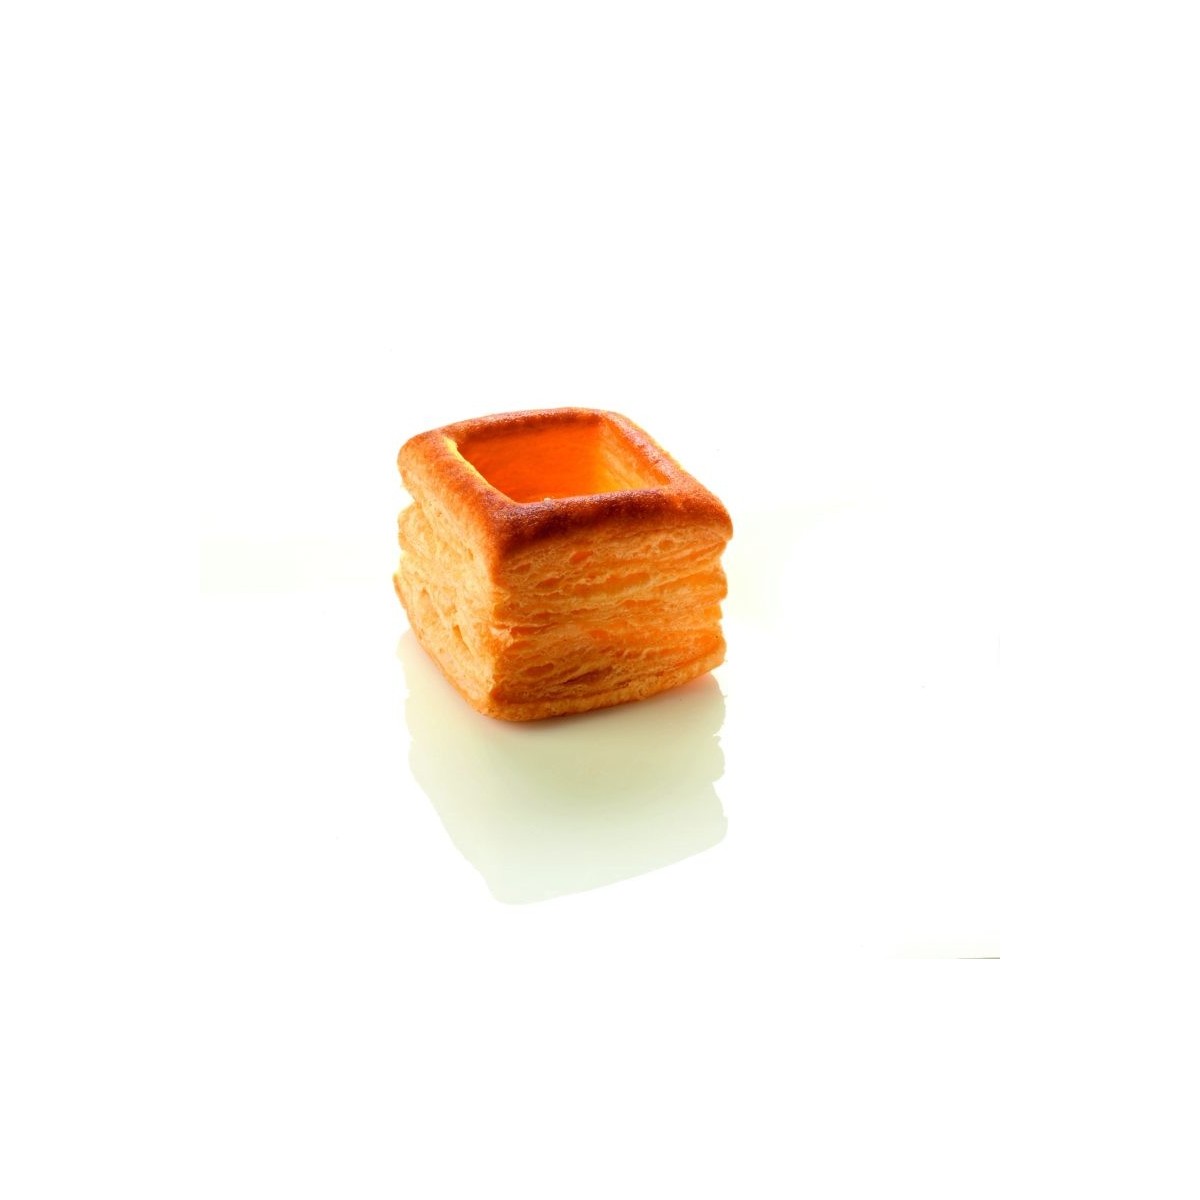 PIDY EMPTY BOUCHEE  SQUARE PUFF PASTRY 6X6CM H4.5CM FIXED HAT 4 PIECES  BOX